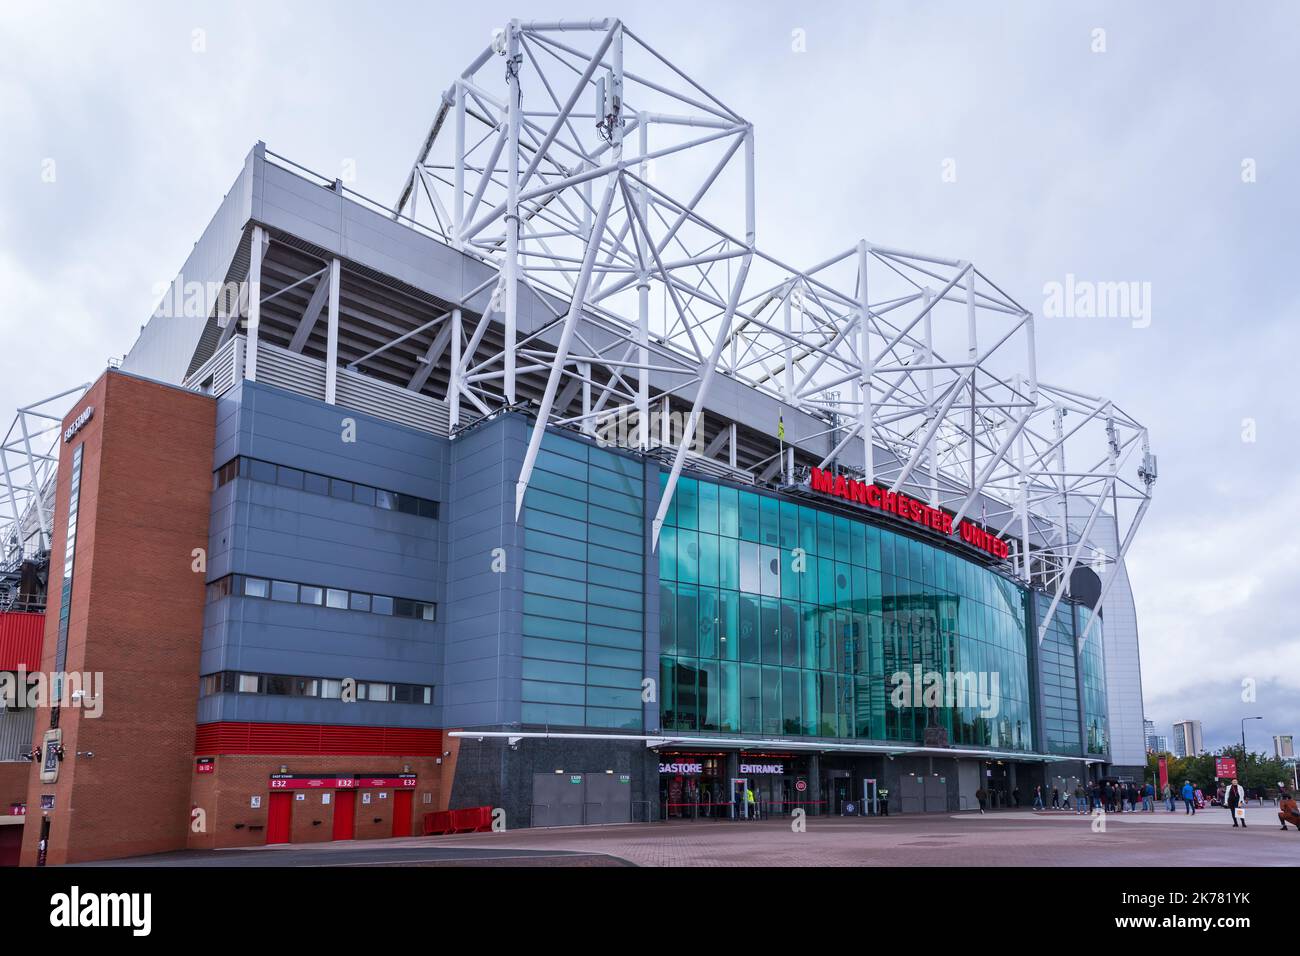 Facade of Old Trafford stadium with Manchester United's name Stock Photo